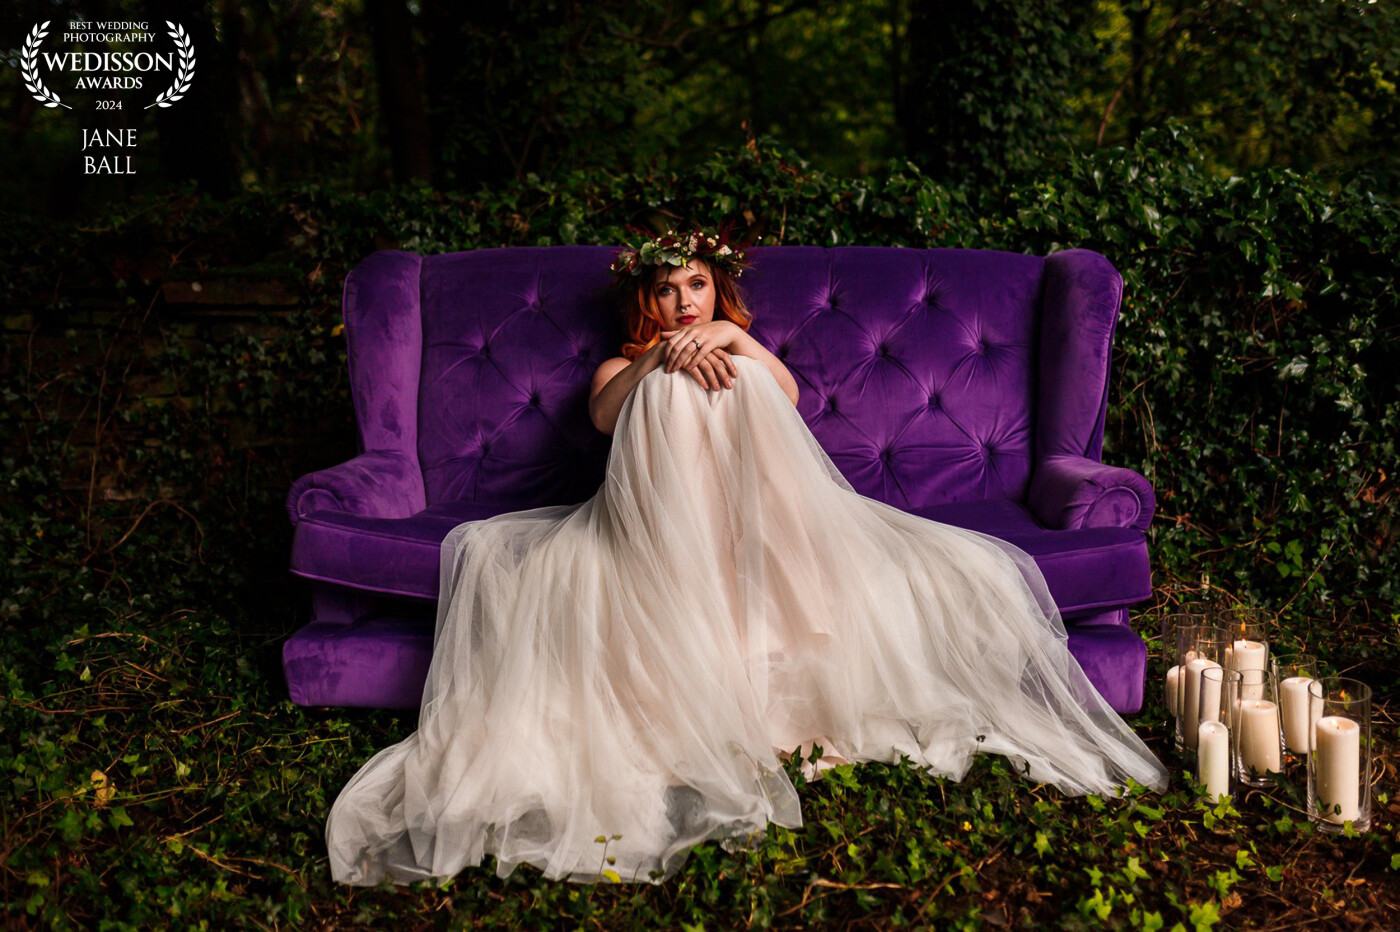 The location for this image is at the back of a rural barn with some beautifully dark and moody woodlands in the background. The venue owner had placed this lush purple sofa in the darkest area so I placed some large candles to one side to counterbalance the dark scene. I asked the bride to sit in the middle of the sofa and we spread her gorgeous boho style dress out and onto the grass. She just "popped" out from the rich colours of the woodland and the sofa. This is one of my most favourite images I've ever produced.